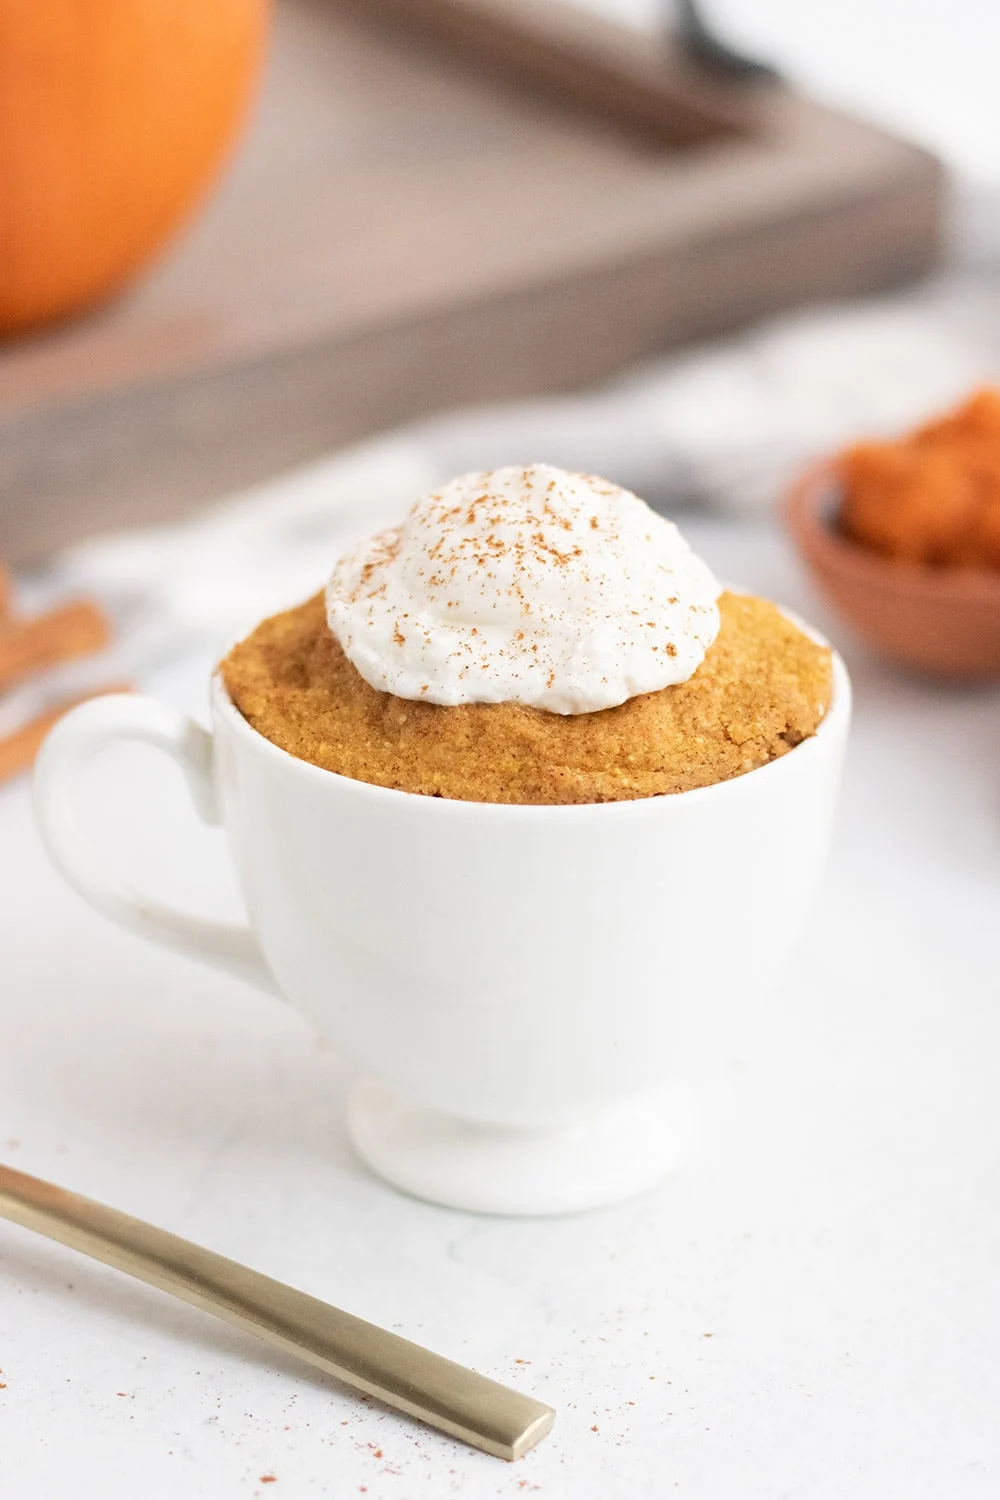 Pumpkin cake in a mug by a fork and a tray.